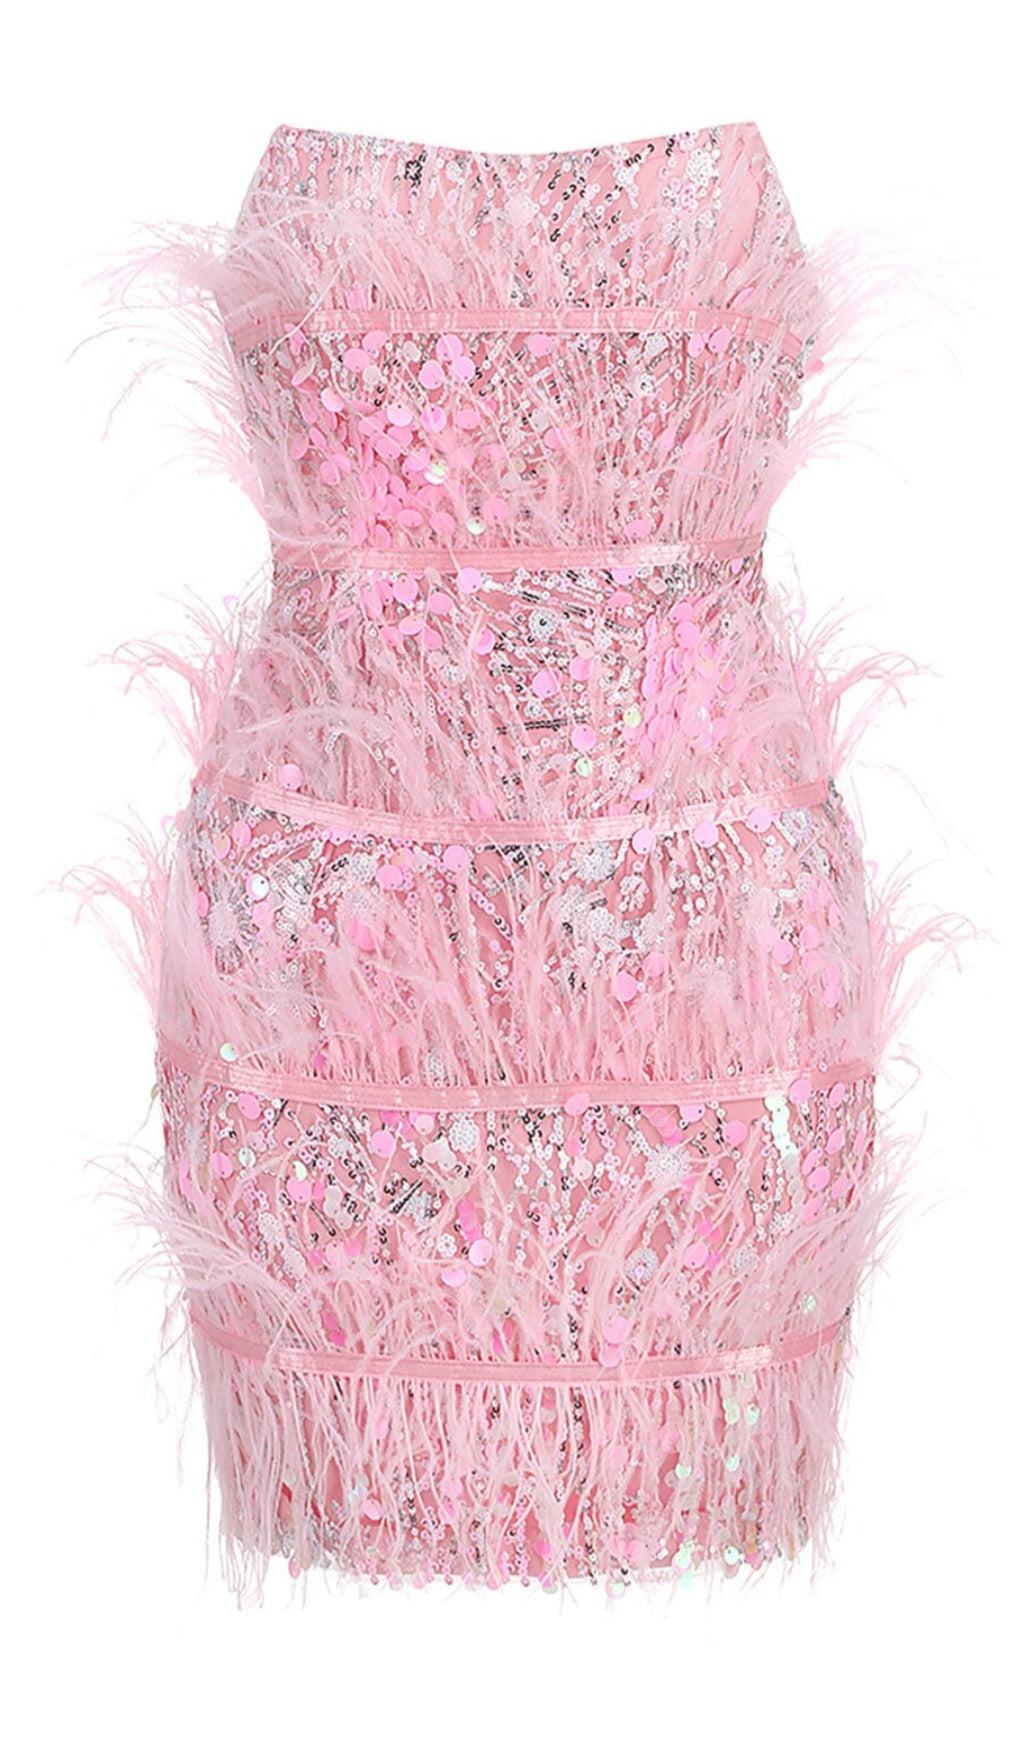 STRAPLESS SEQUINS SHINY GLITTER DRESS IN PINK